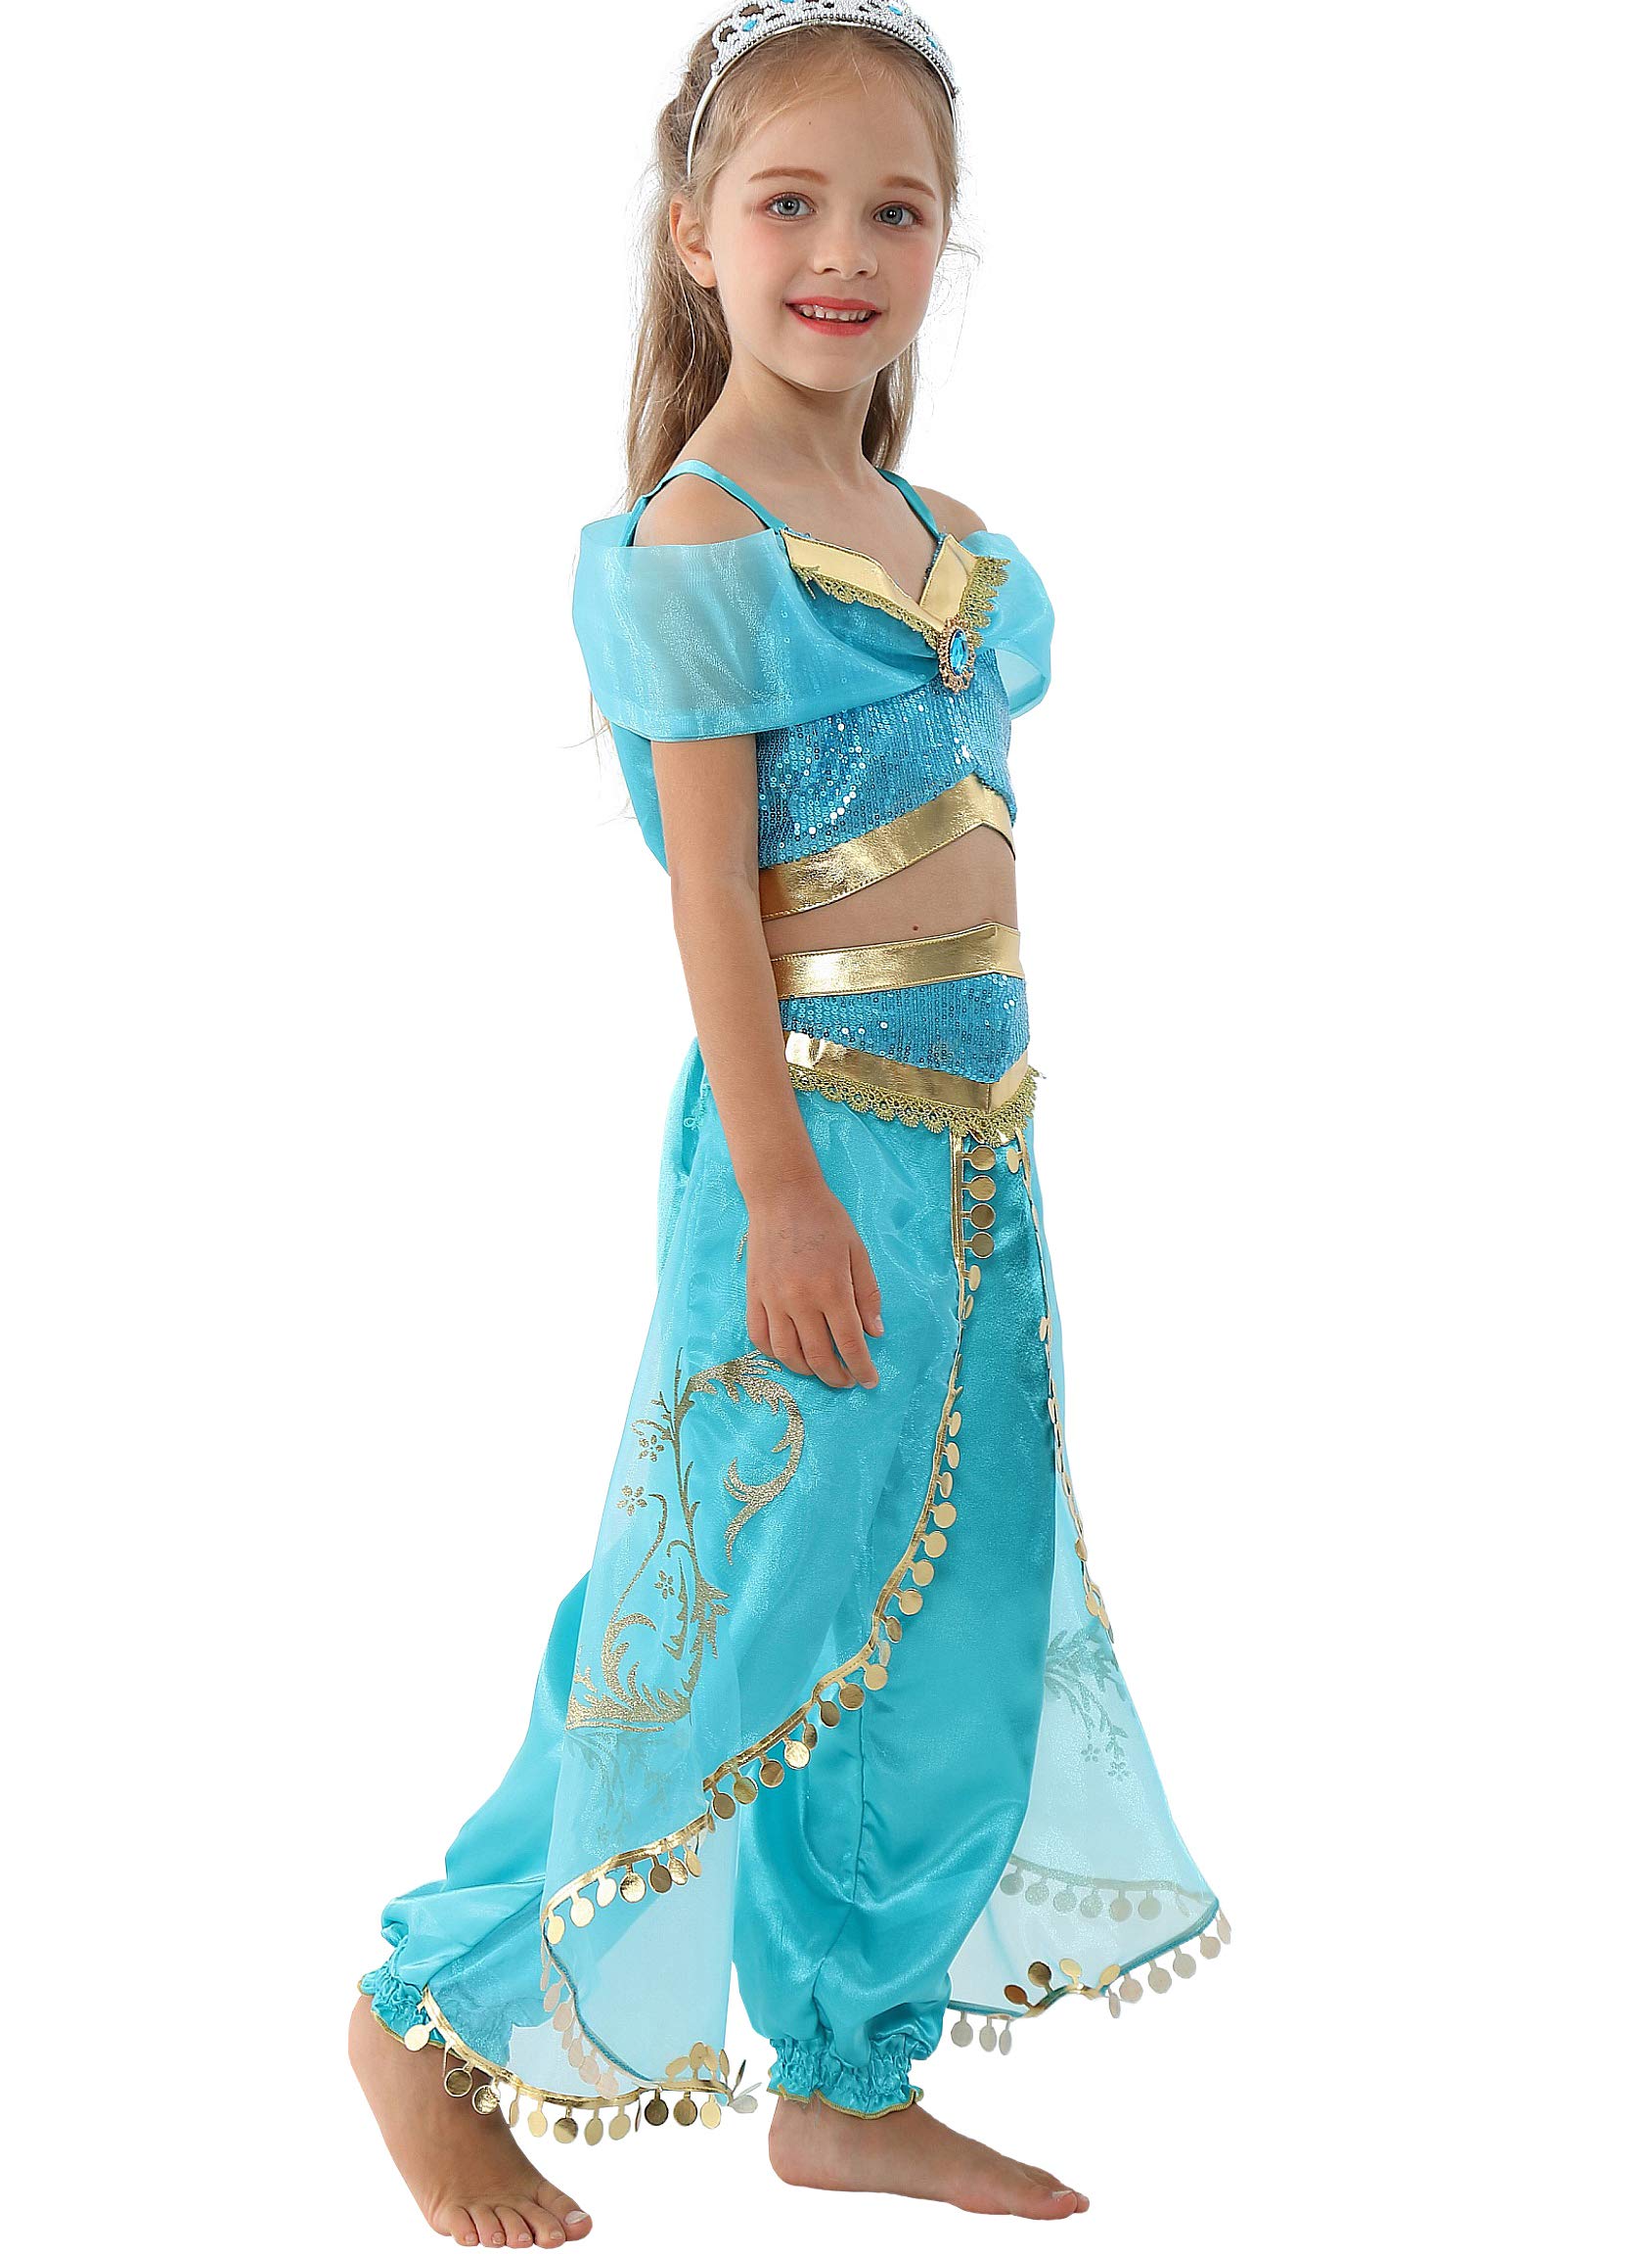 Dressy Daisy Arabian Princess Costume with Headband Halloween Party Fancy Dress Up Belly Dance Wear Outfit for Girls